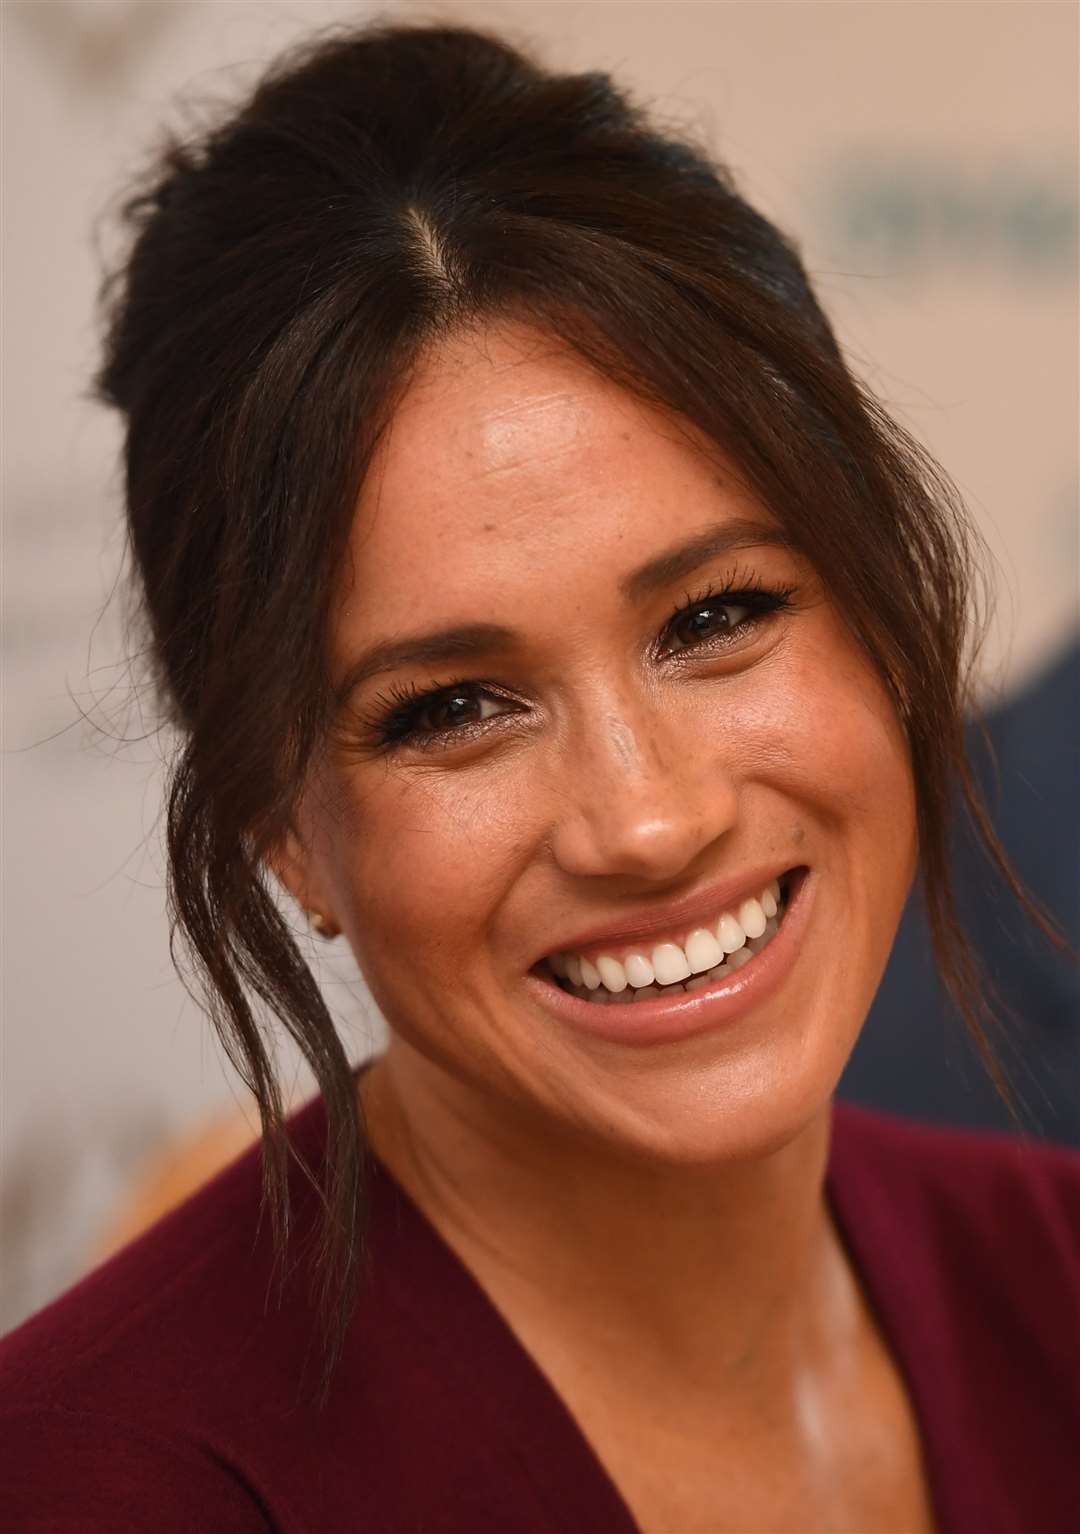 The Duchess of Sussex is suing Associated Newspapers (Jeremy Selwyn/Evening Standard/PA)